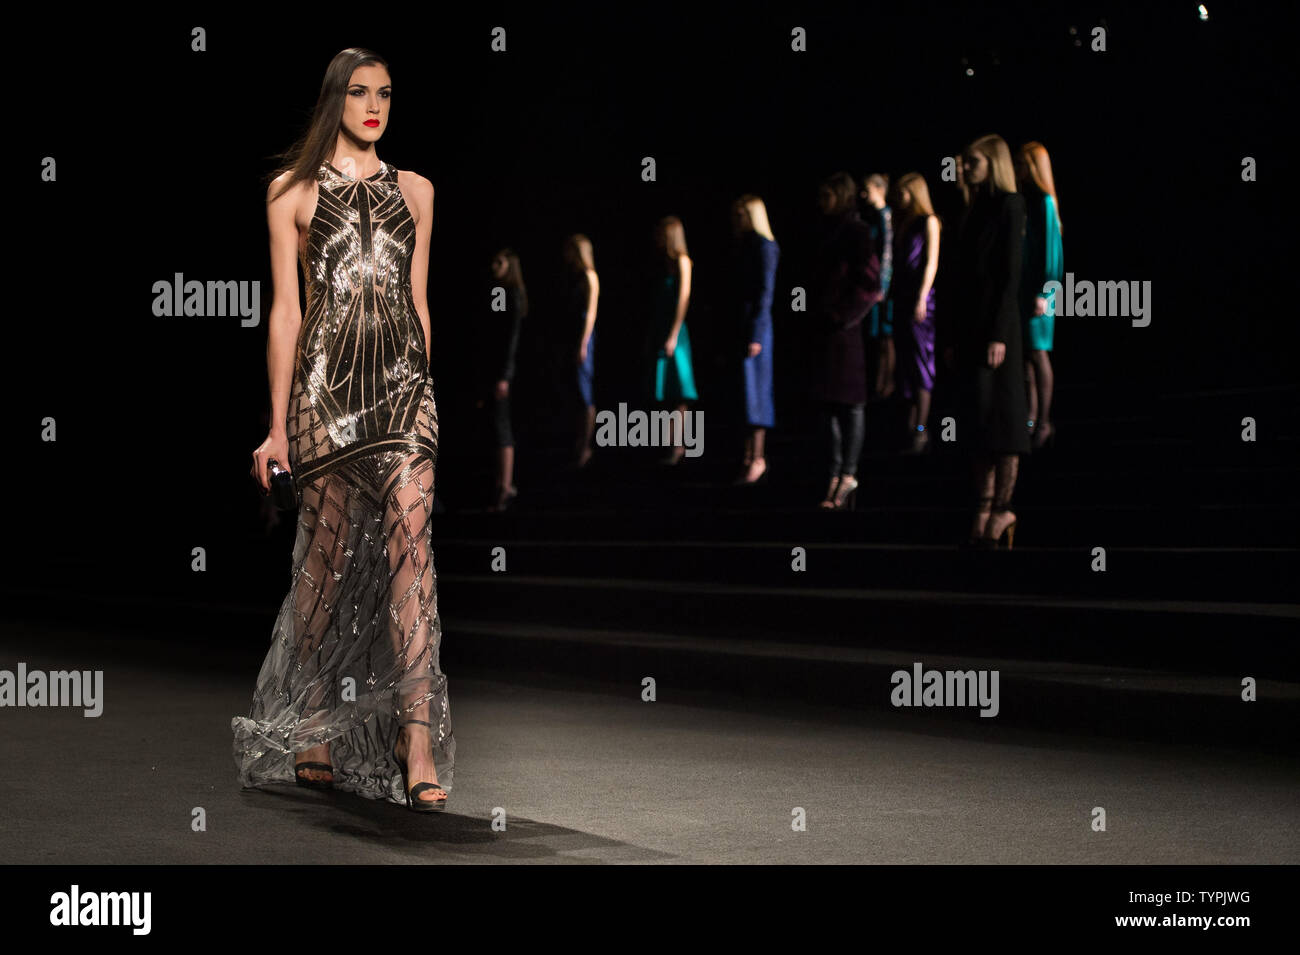 A model walks on the runway at the Monique Lhuillier fashion show during Mercedes-Benz Fashion Week at Lincoln Center in New York City on February 13, 2015. February's New York Fashion Week will be the last one held at Lincoln Center.       Photo by Andrea Hanks/UPI Stock Photo